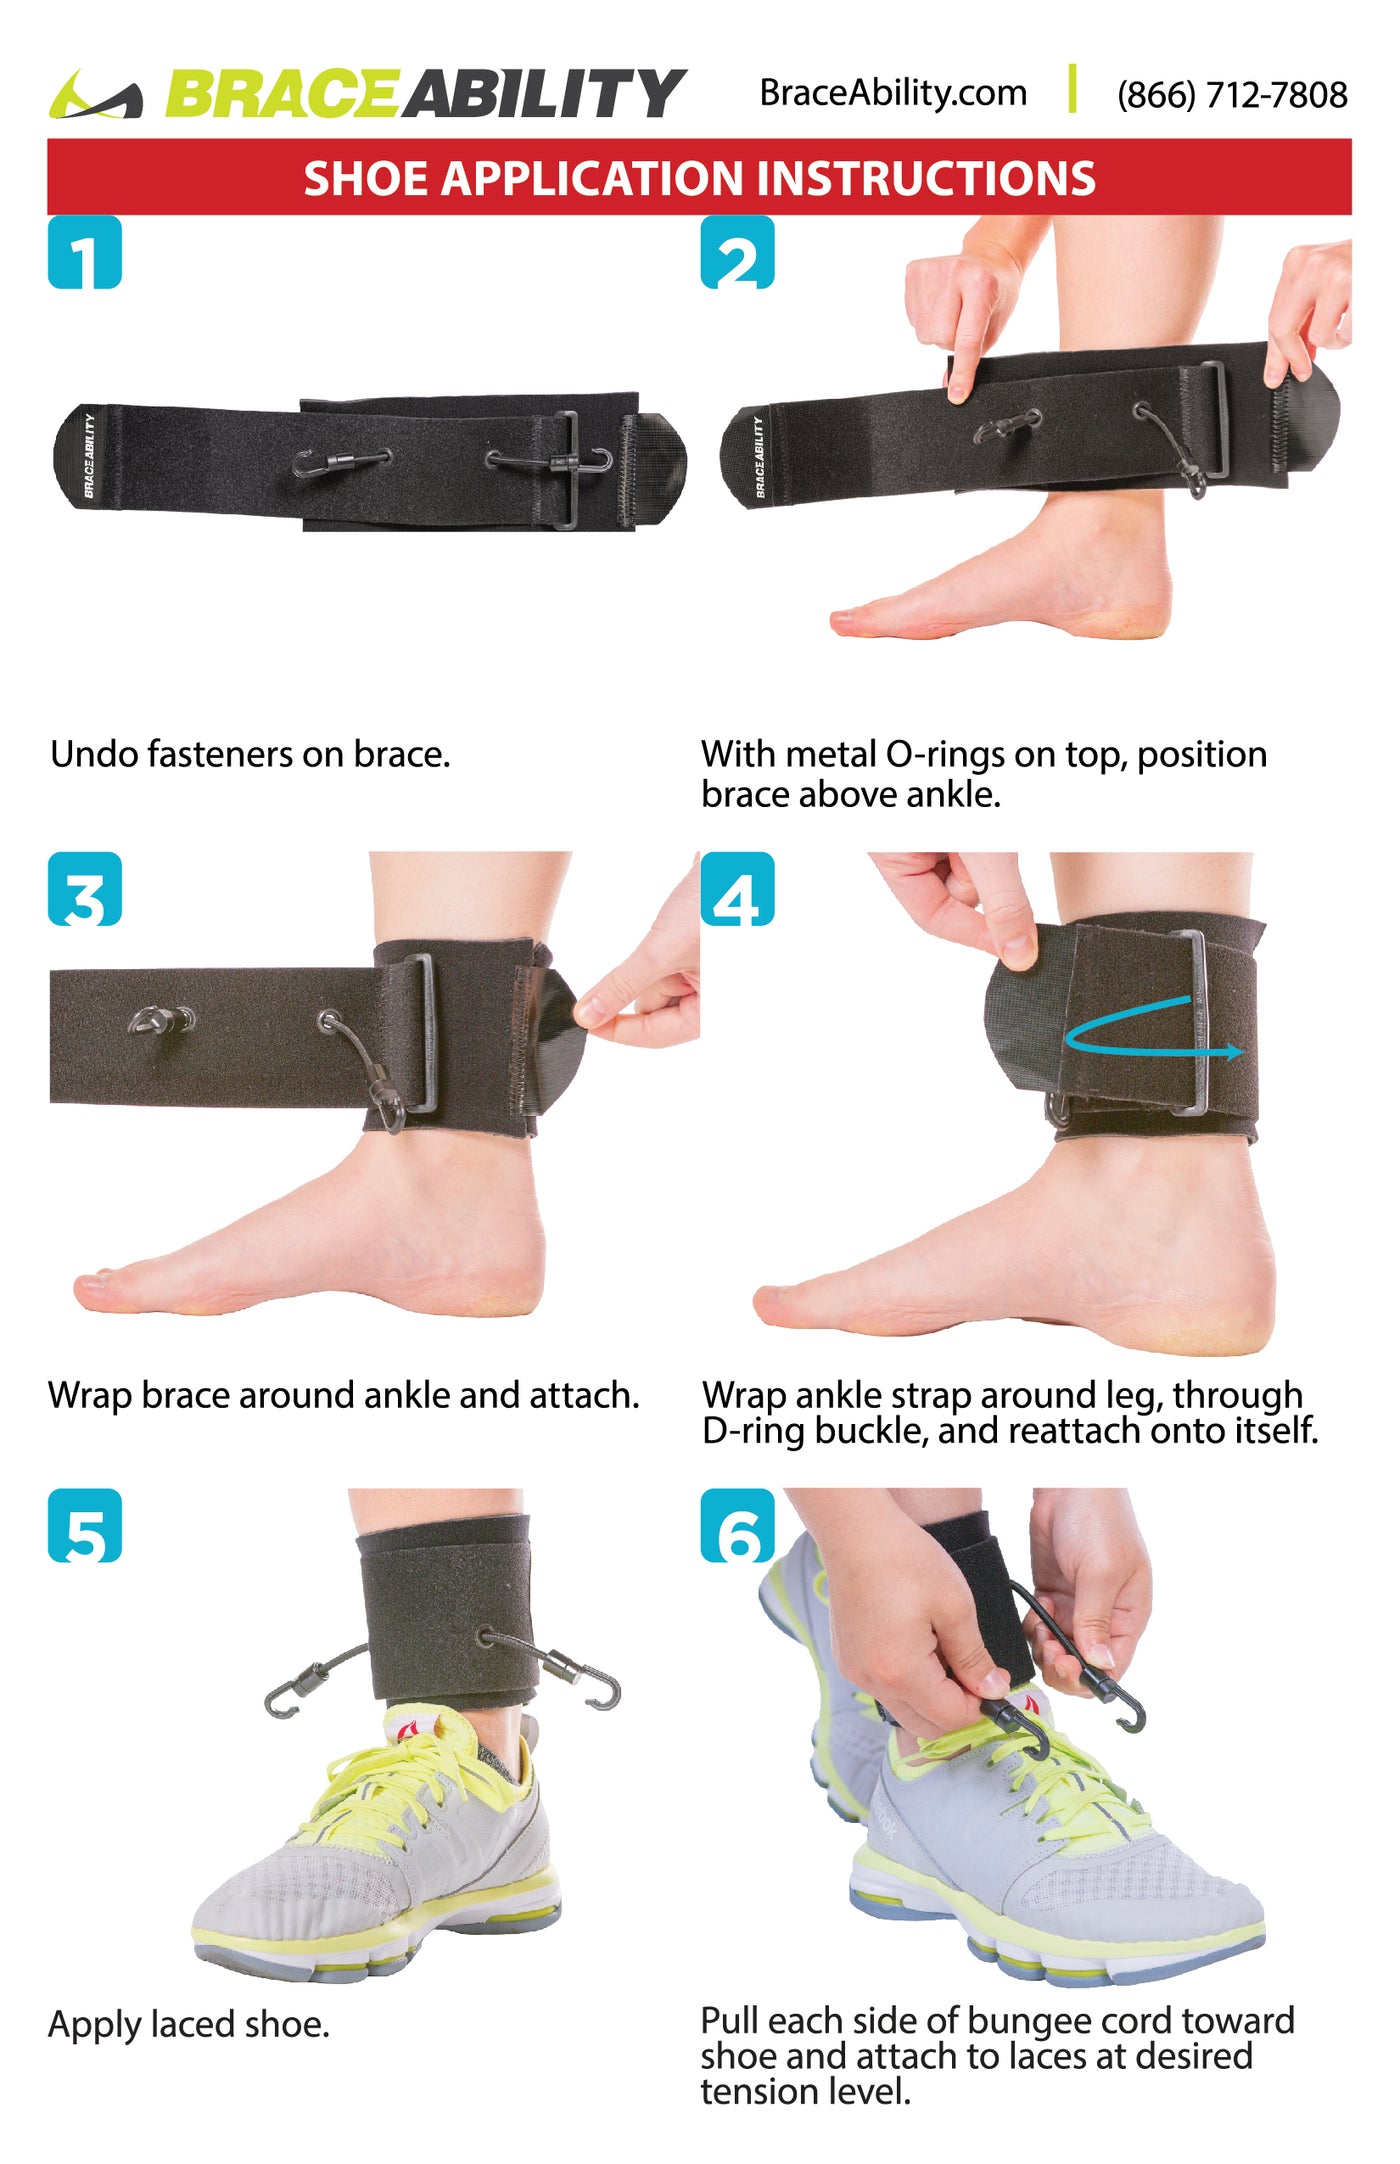 follow the instruction sheet steps for how to wrap the drop foot brace around your ankle